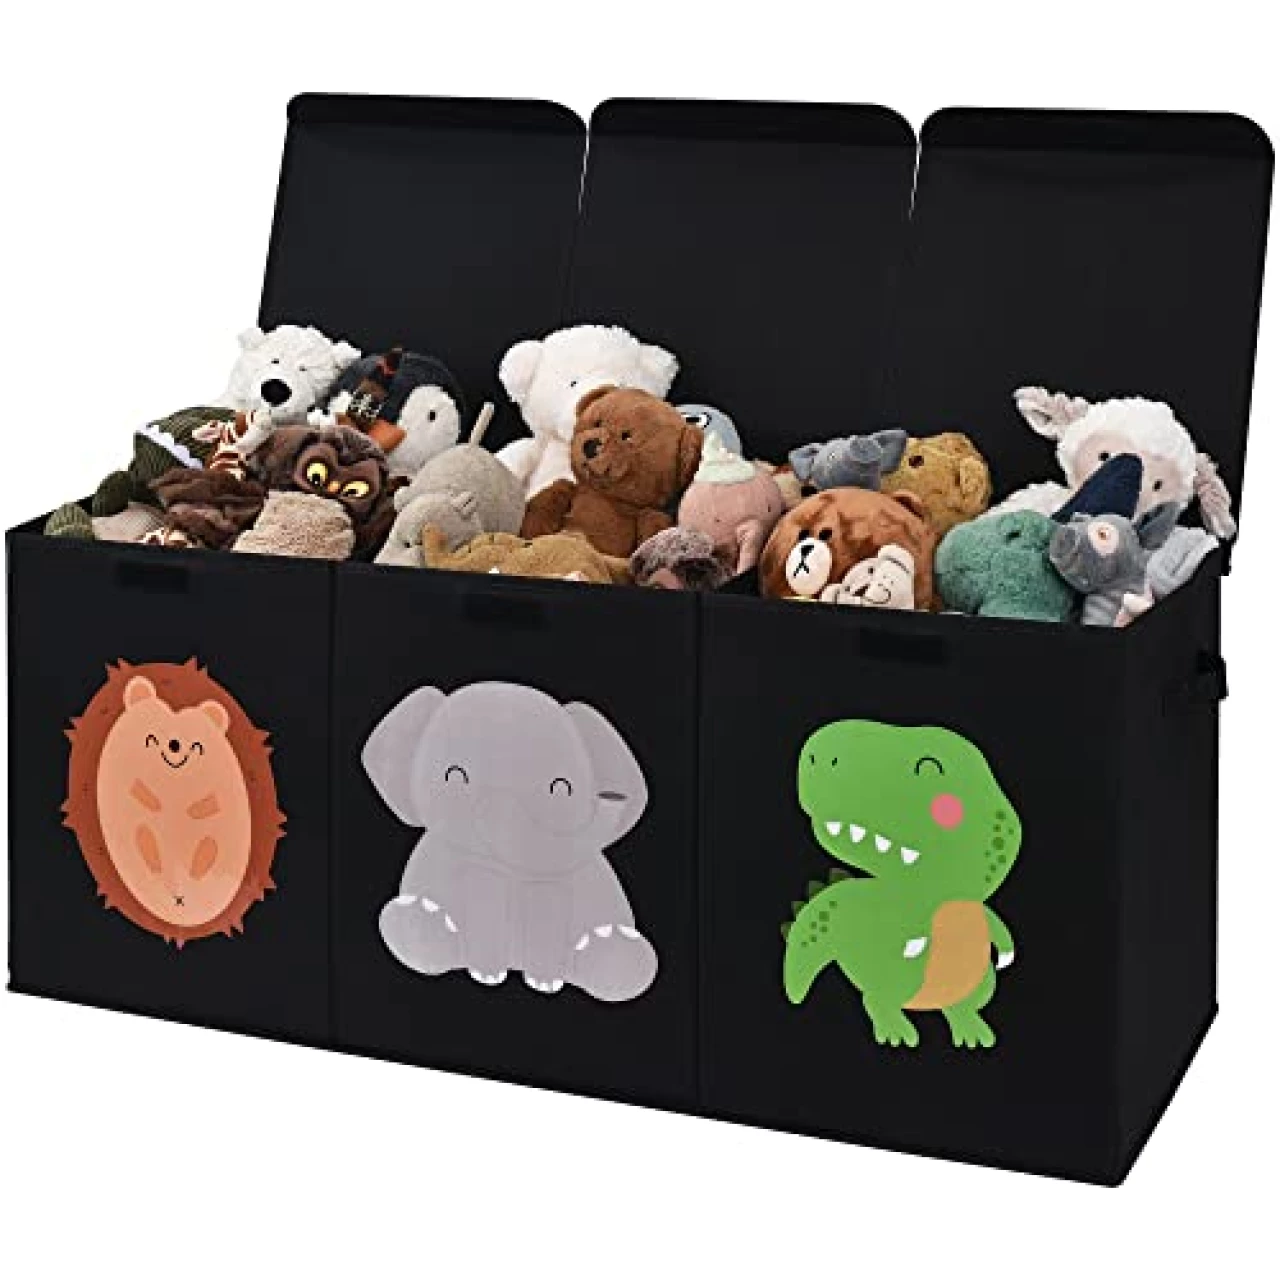 GRANNY SAYS Toy Storage Organizer with Lids, Foldable Toy Boxes for Kids Extra Large